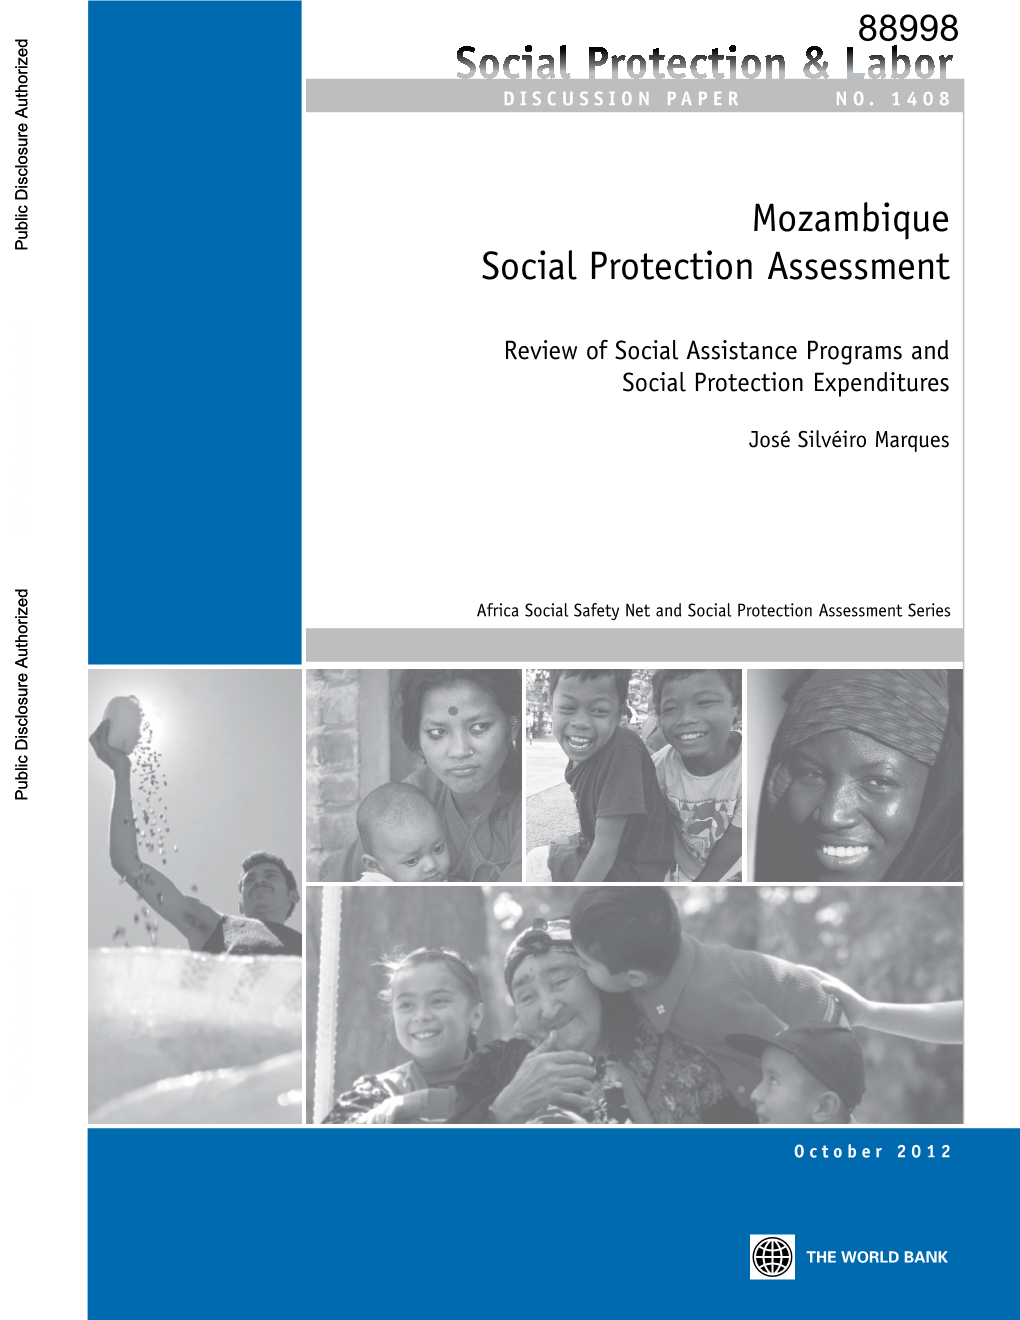 Mozambique Social Protection Assessment: Review of Social Assistance Programs and Social Protection Expenditures by Jose Silveiro Marques, October 2012